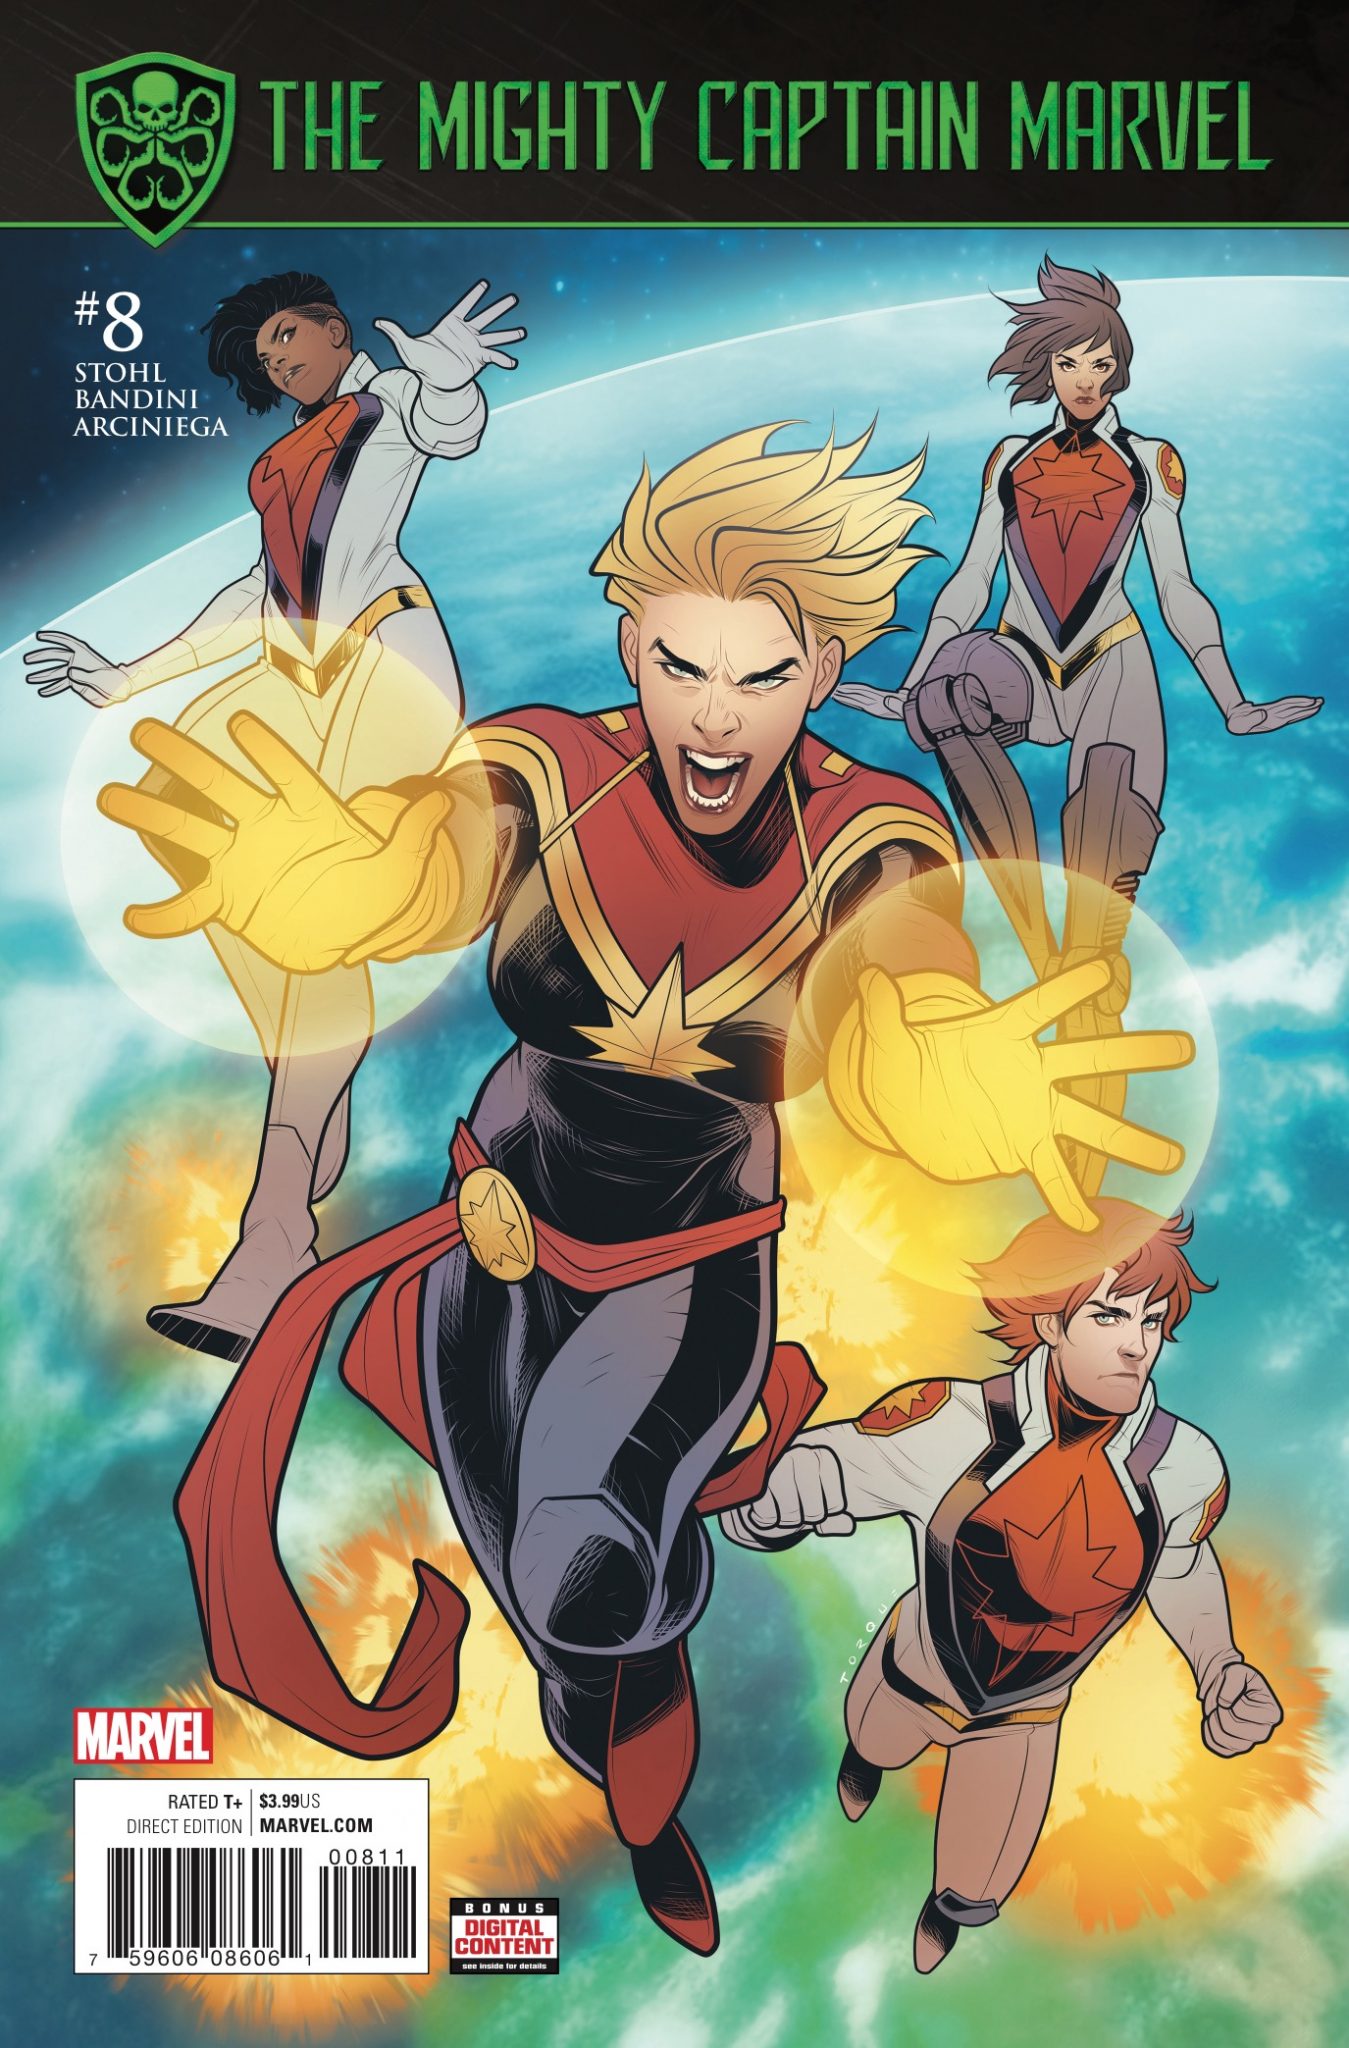 The Mighty Captain Marvel #8 Review